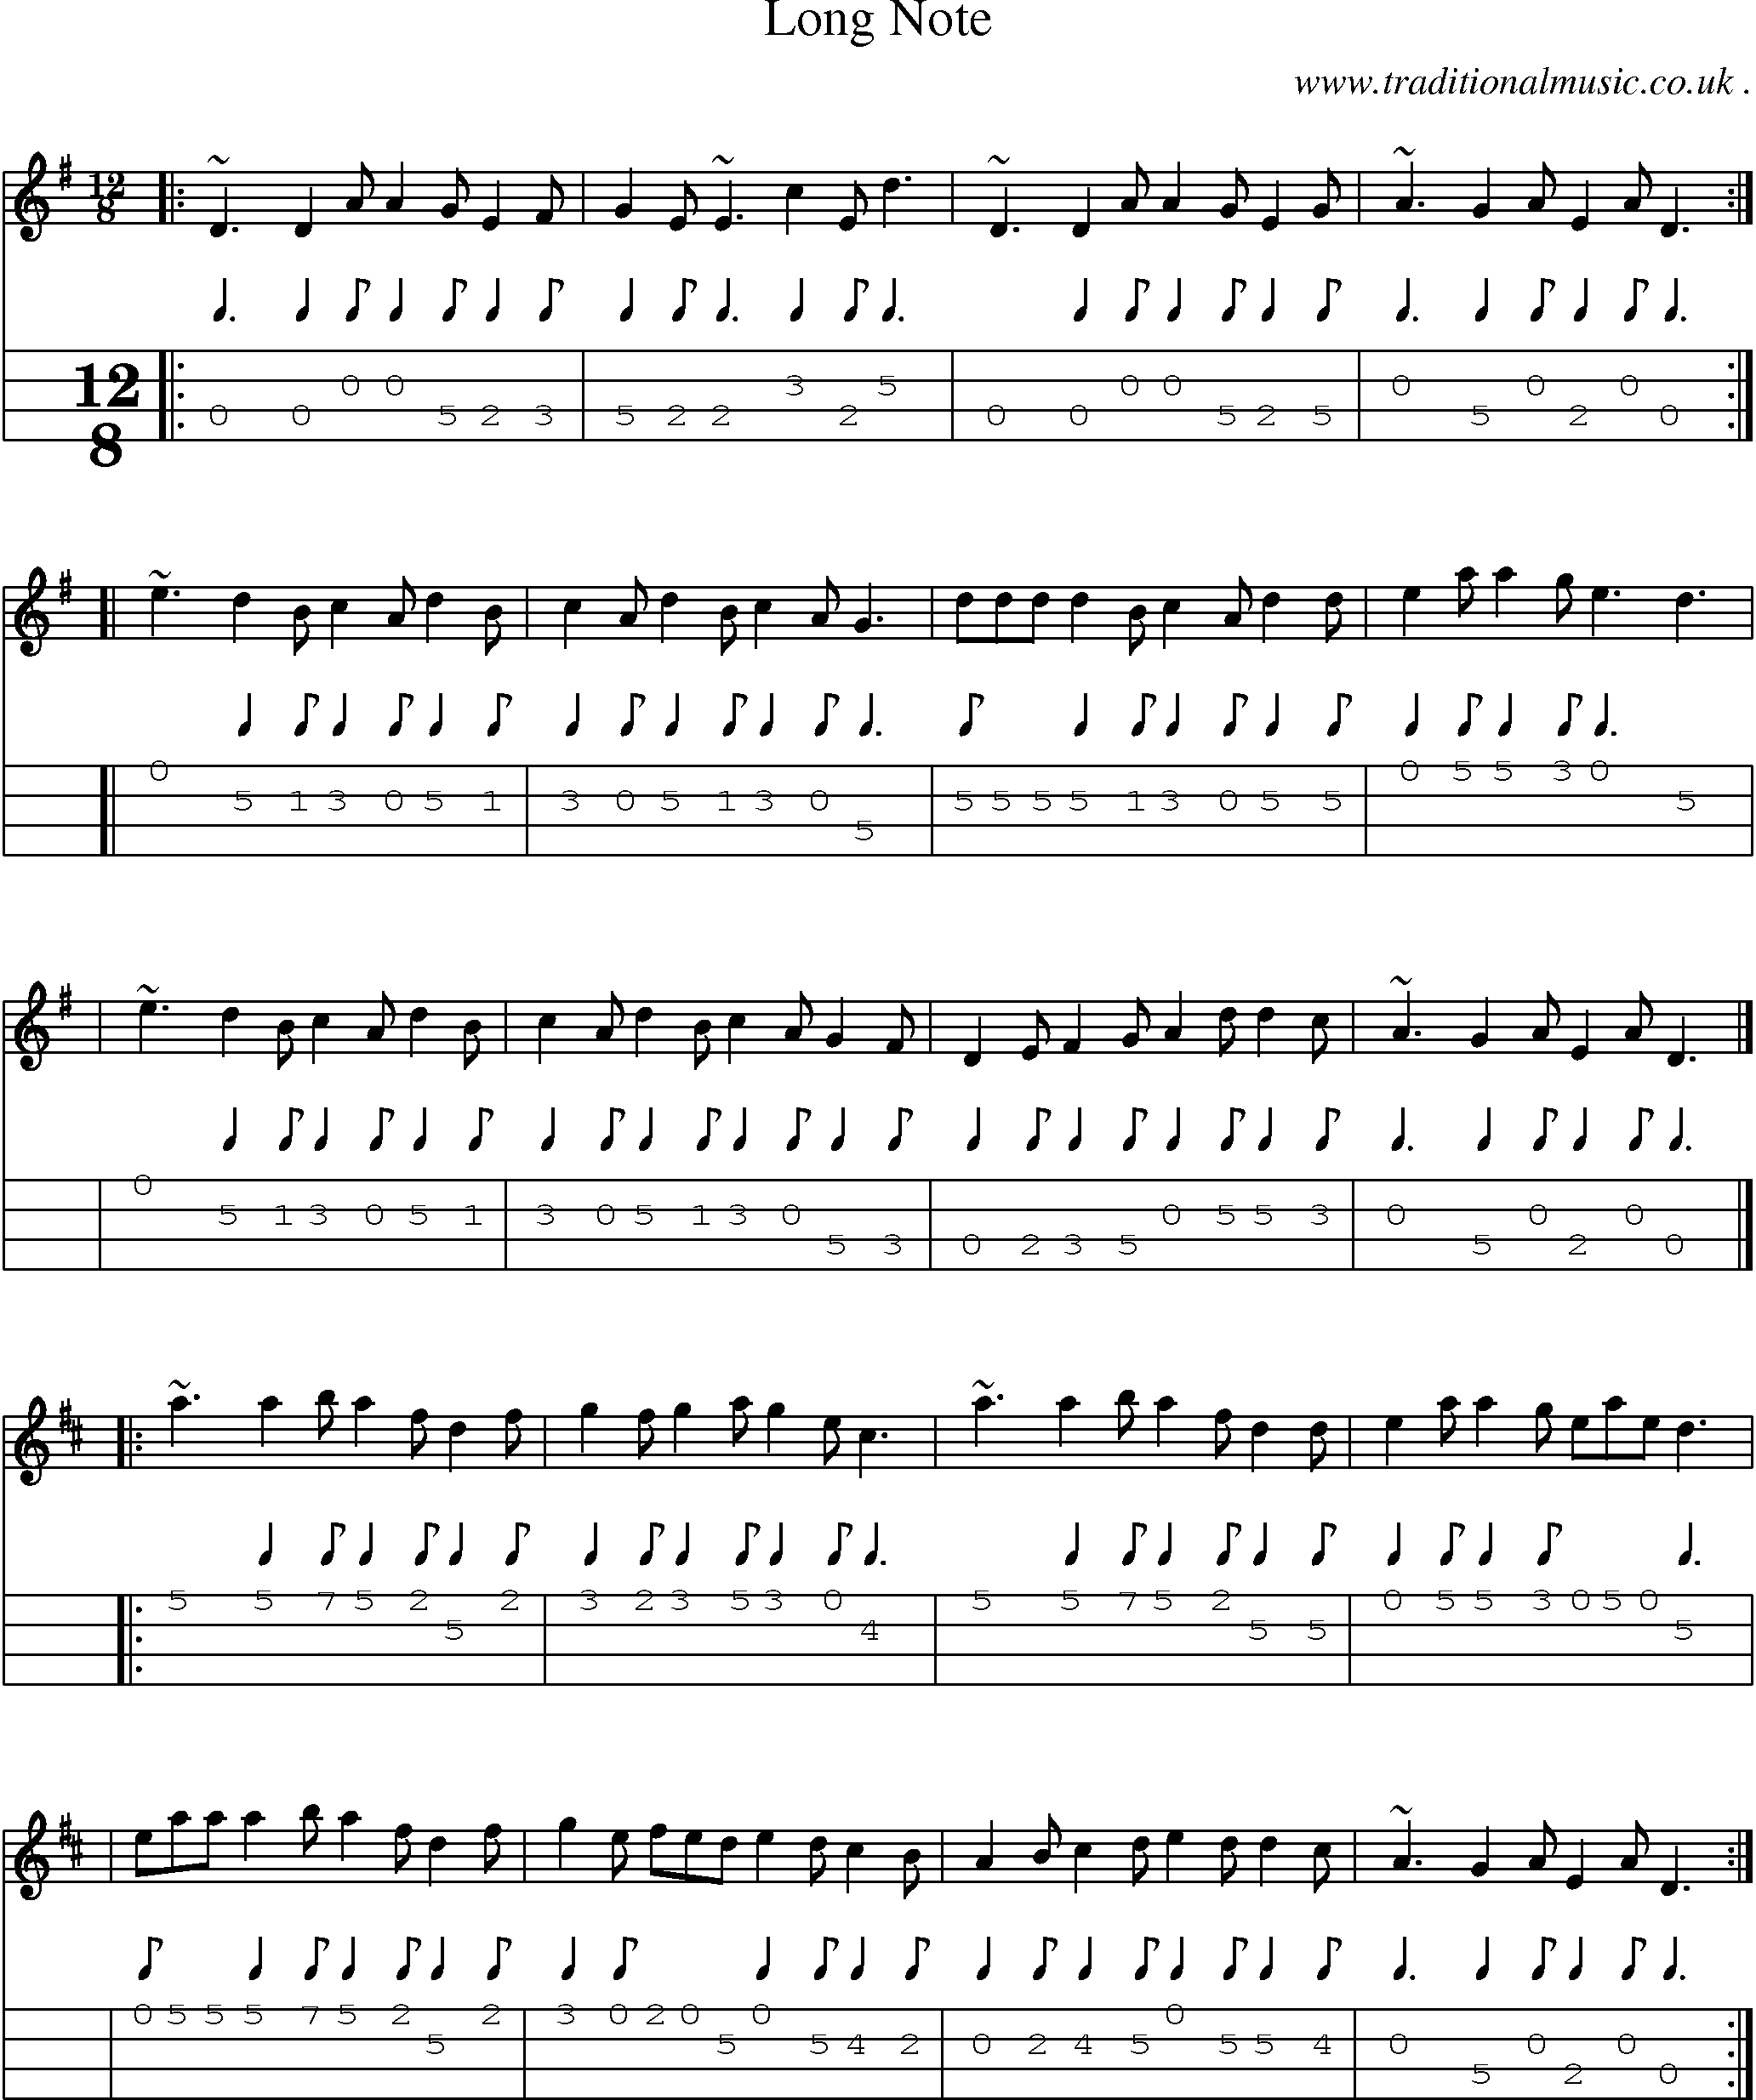 Sheet-music  score, Chords and Mandolin Tabs for Long Note